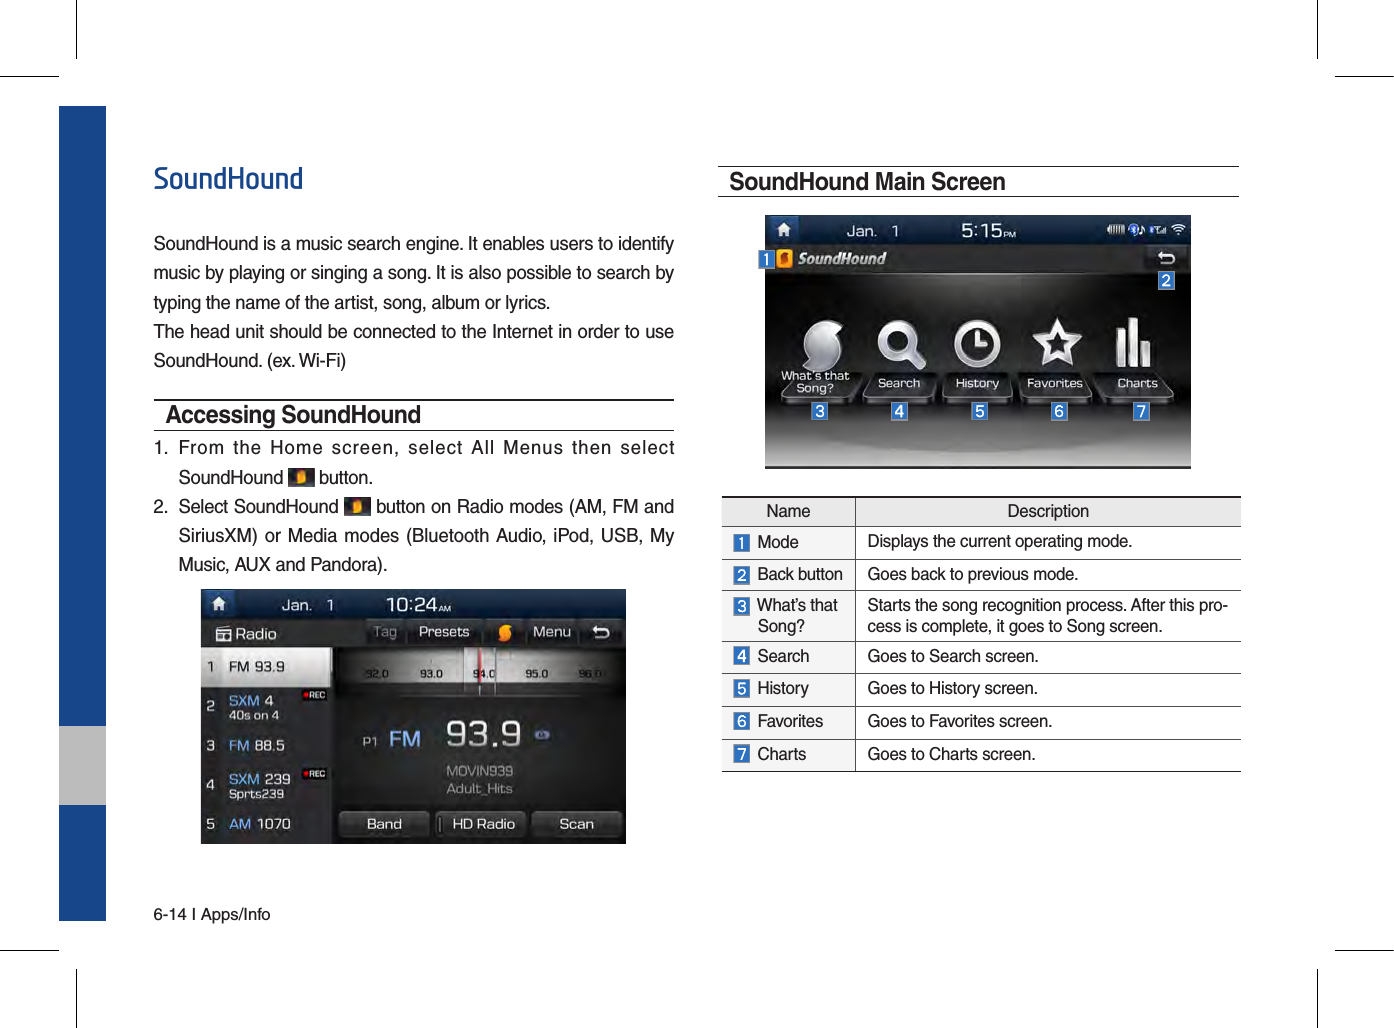 6-14 I Apps/InfoSoundHoundSoundHound is a music search engine. It enables users to identify music by playing or singing a song. It is also possible to search by typing the name of the artist, song, album or lyrics.The head unit should be connected to the Internet in order to use SoundHound. (ex. Wi-Fi)Accessing SoundHound 1.   From  the  Home  screen,  select  All  Menus  then  select SoundHound   button.2.   Select SoundHound   button on Radio modes (AM, FM and SiriusXM) or Media modes (Bluetooth Audio, iPod, USB, My Music, AUX and Pandora). SoundHound Main ScreenName Description Mode Displays the current operating mode.  Back button Goes back to previous mode.  What’s that   Song? Starts the song recognition process. After this pro-cess is complete, it goes to Song screen.  Search Goes to Search screen. History Goes to History screen.  Favorites Goes to Favorites screen. Charts Goes to Charts screen.